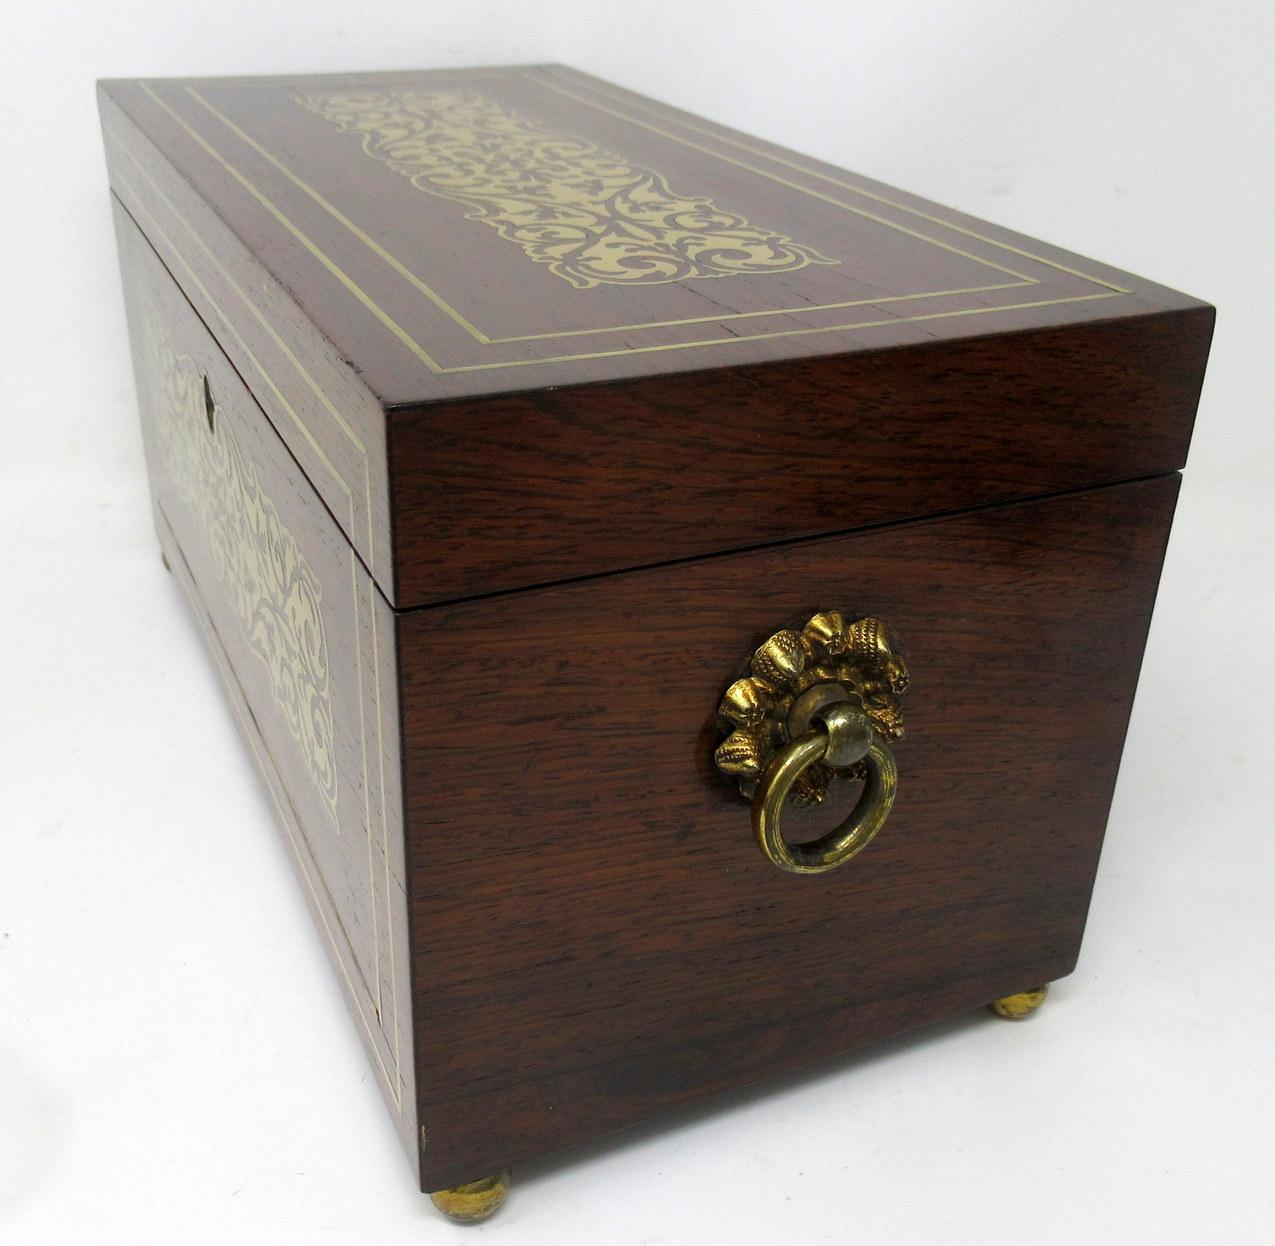 Antique Brass Inlaid English Regency Mahogany Double Tea Caddy Box 19th Century For Sale 2